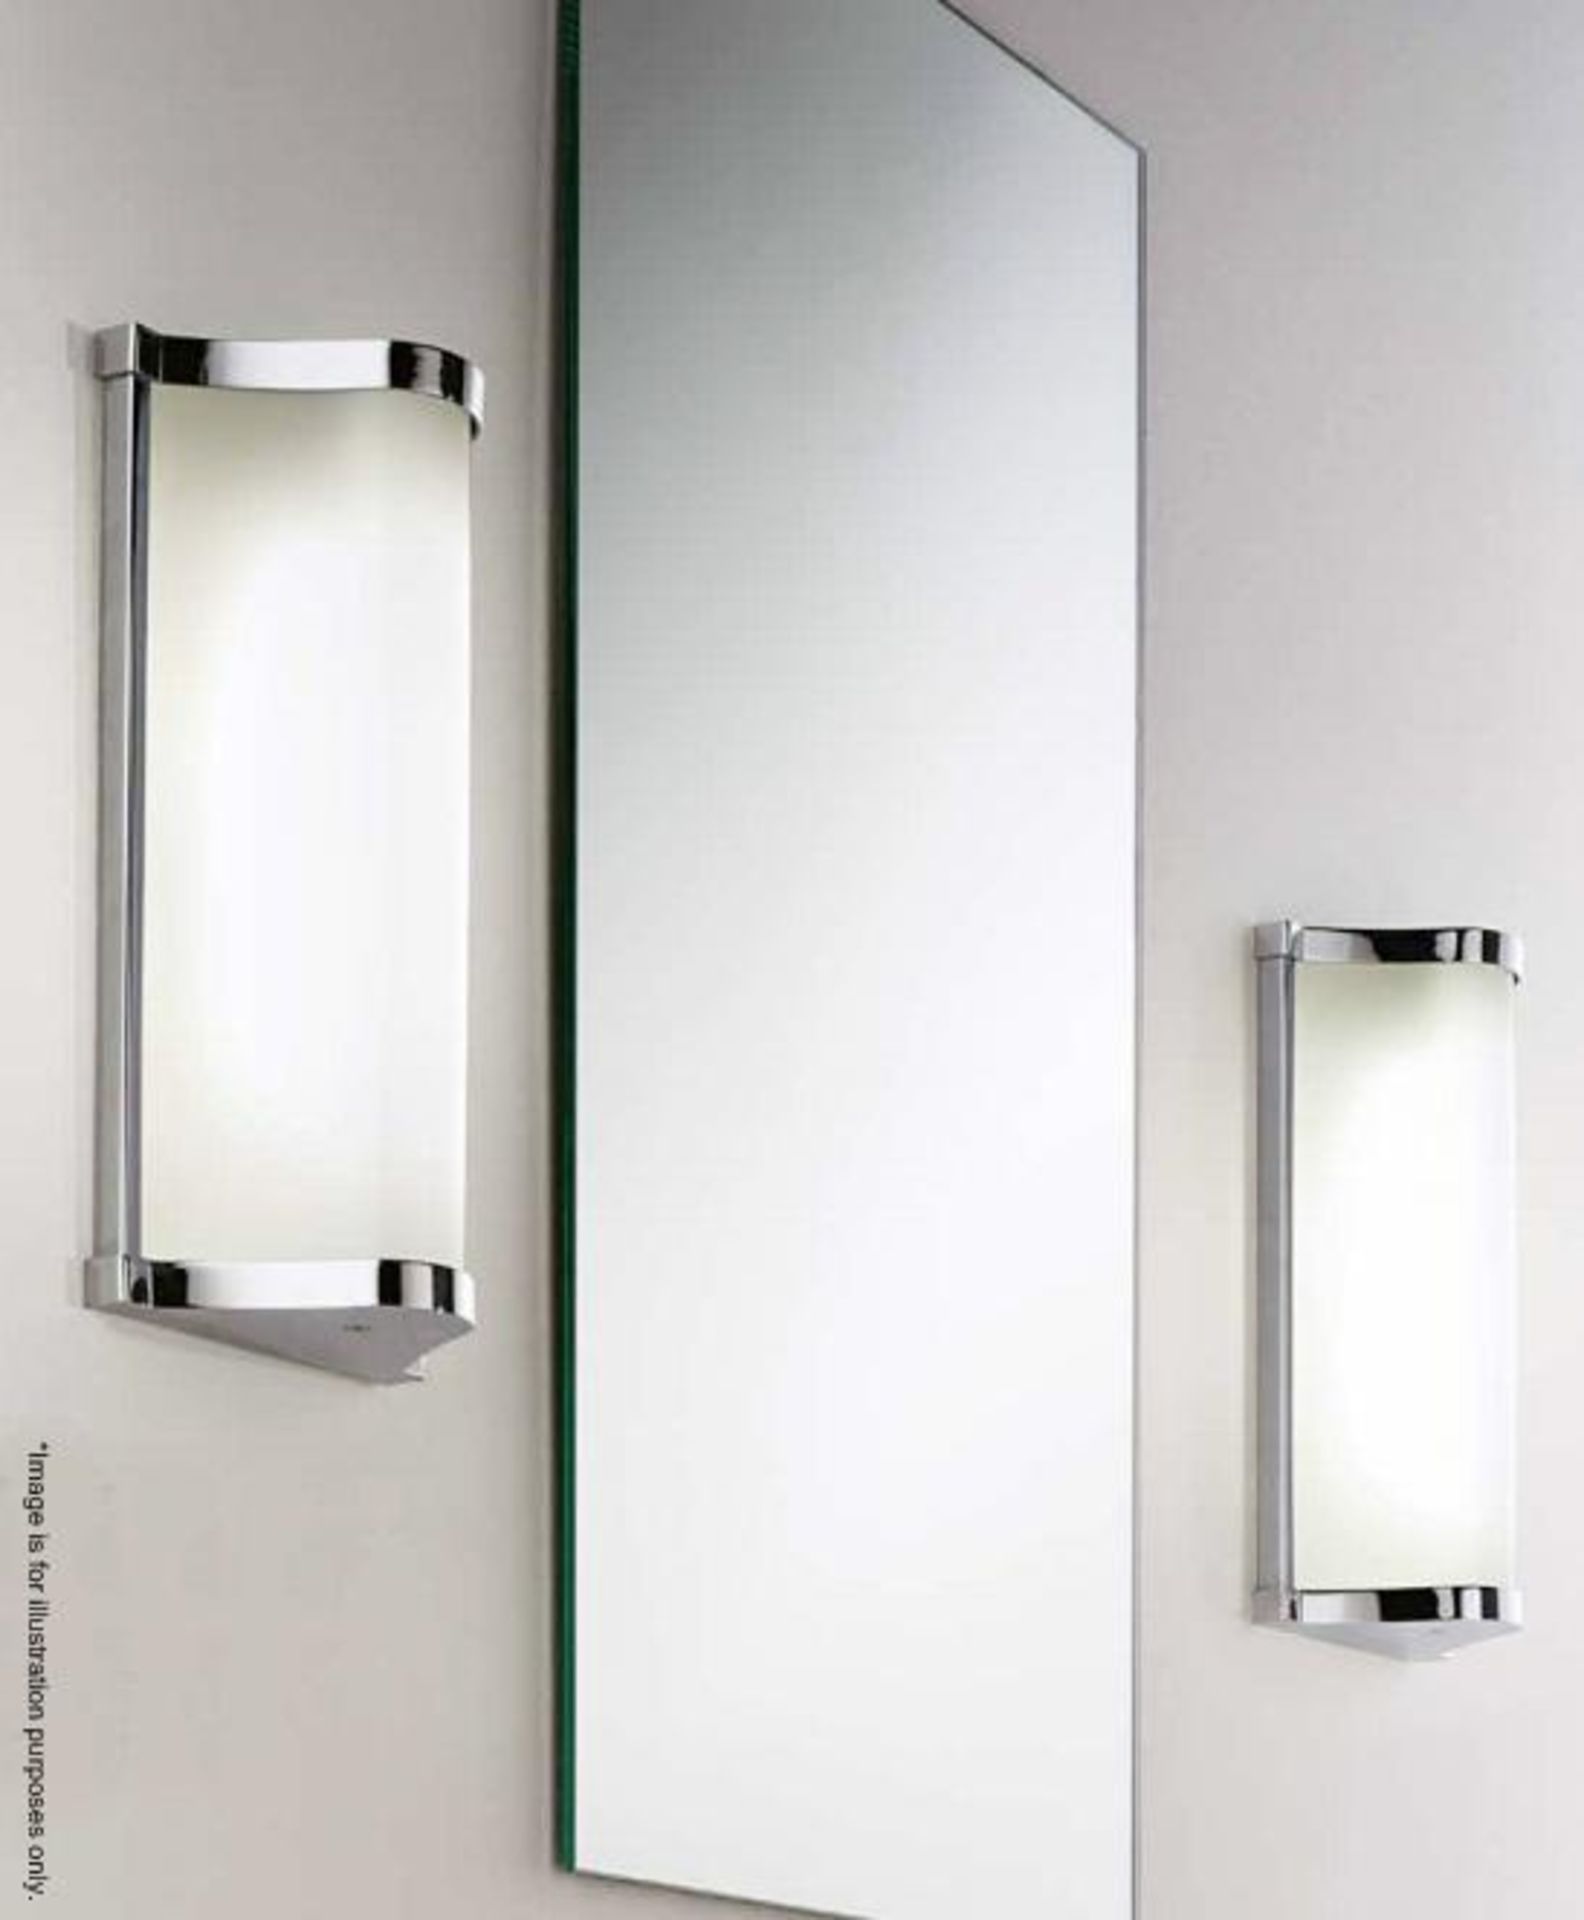 A Pair Of CHELSOM Luxury Bathroom Wall Light (Upright) - IP44 - Zone 2 - Unused Boxed Stock - CL001